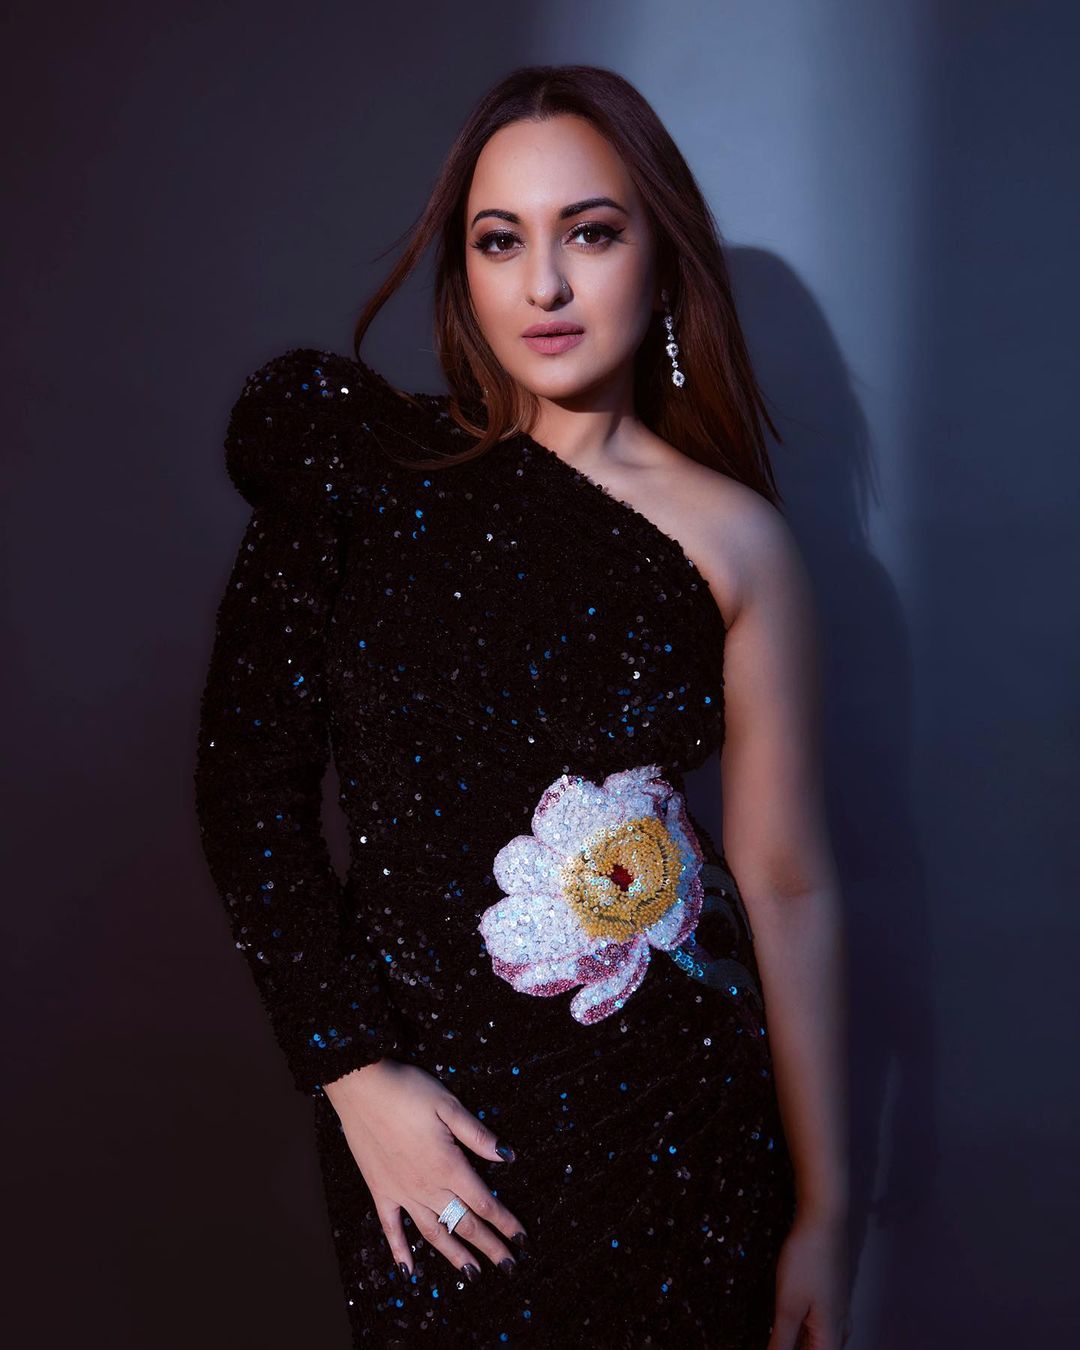 Sonakshi Sinha The Actress Looks Fabulous In Her Floral Outfits Sonakshi Sinha ফ্লোরাল ফ্যাশনে